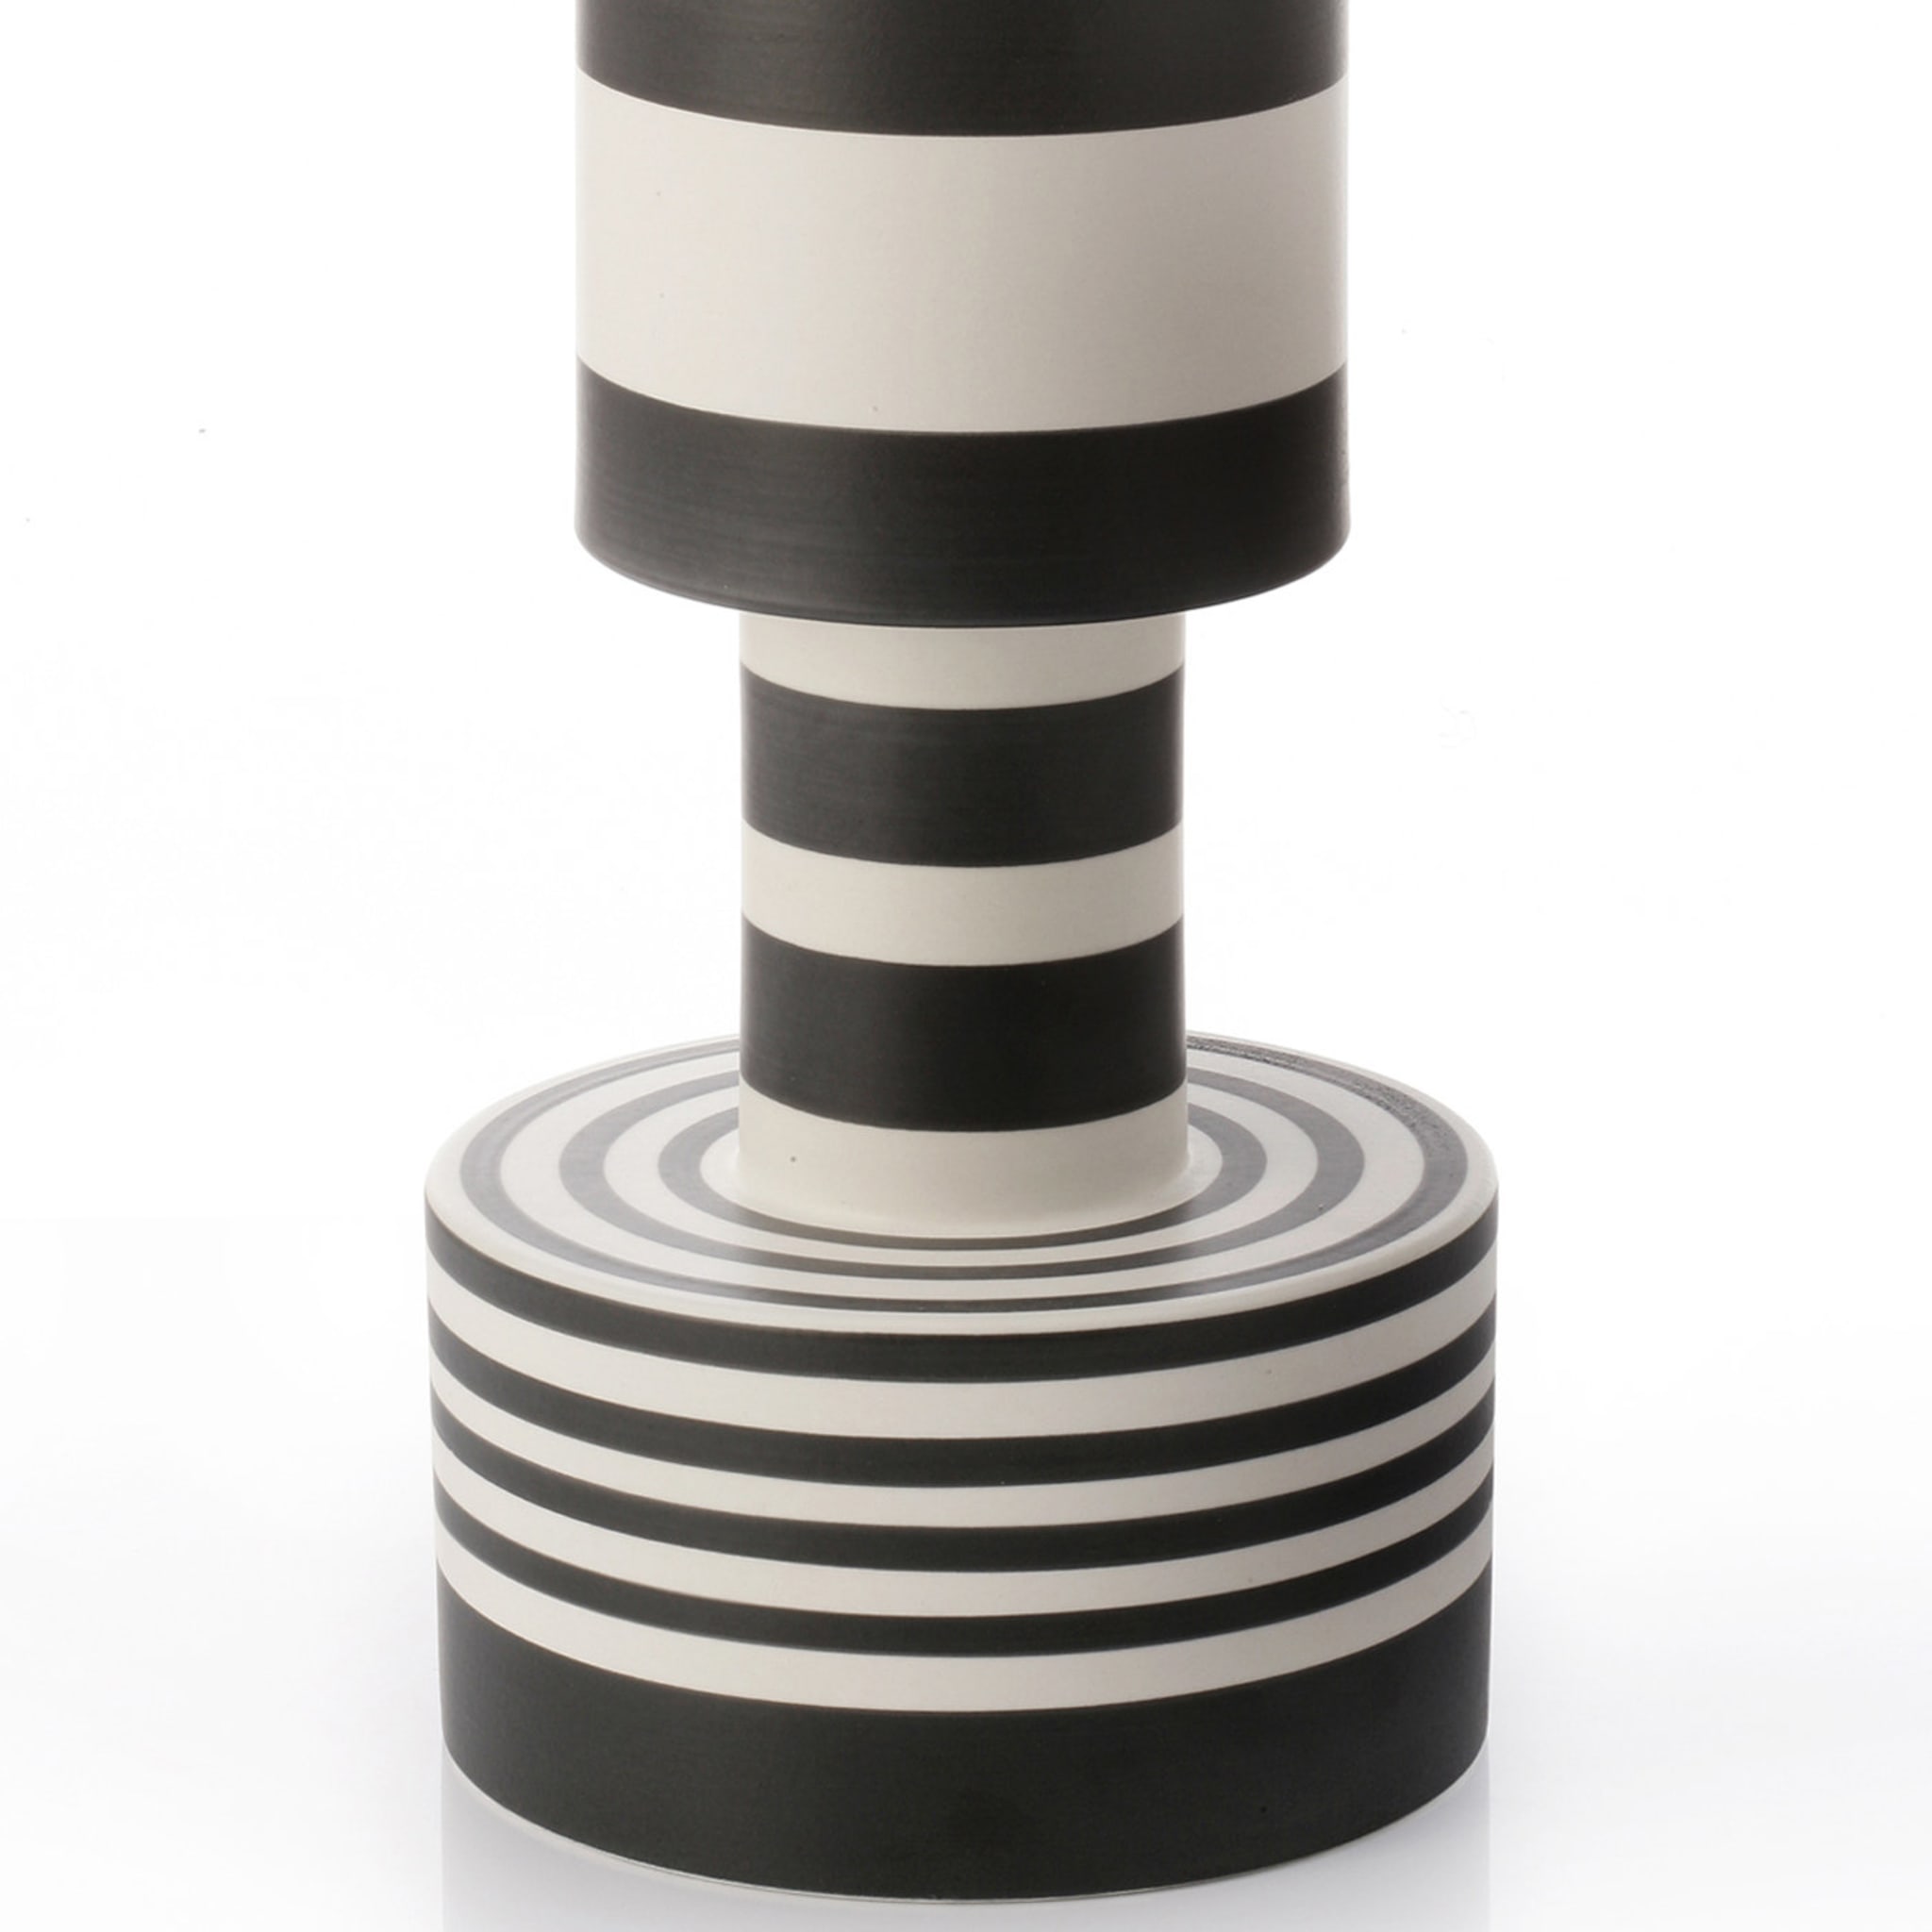 Chalice Vase by Ettore Sottsass - Alternative view 2